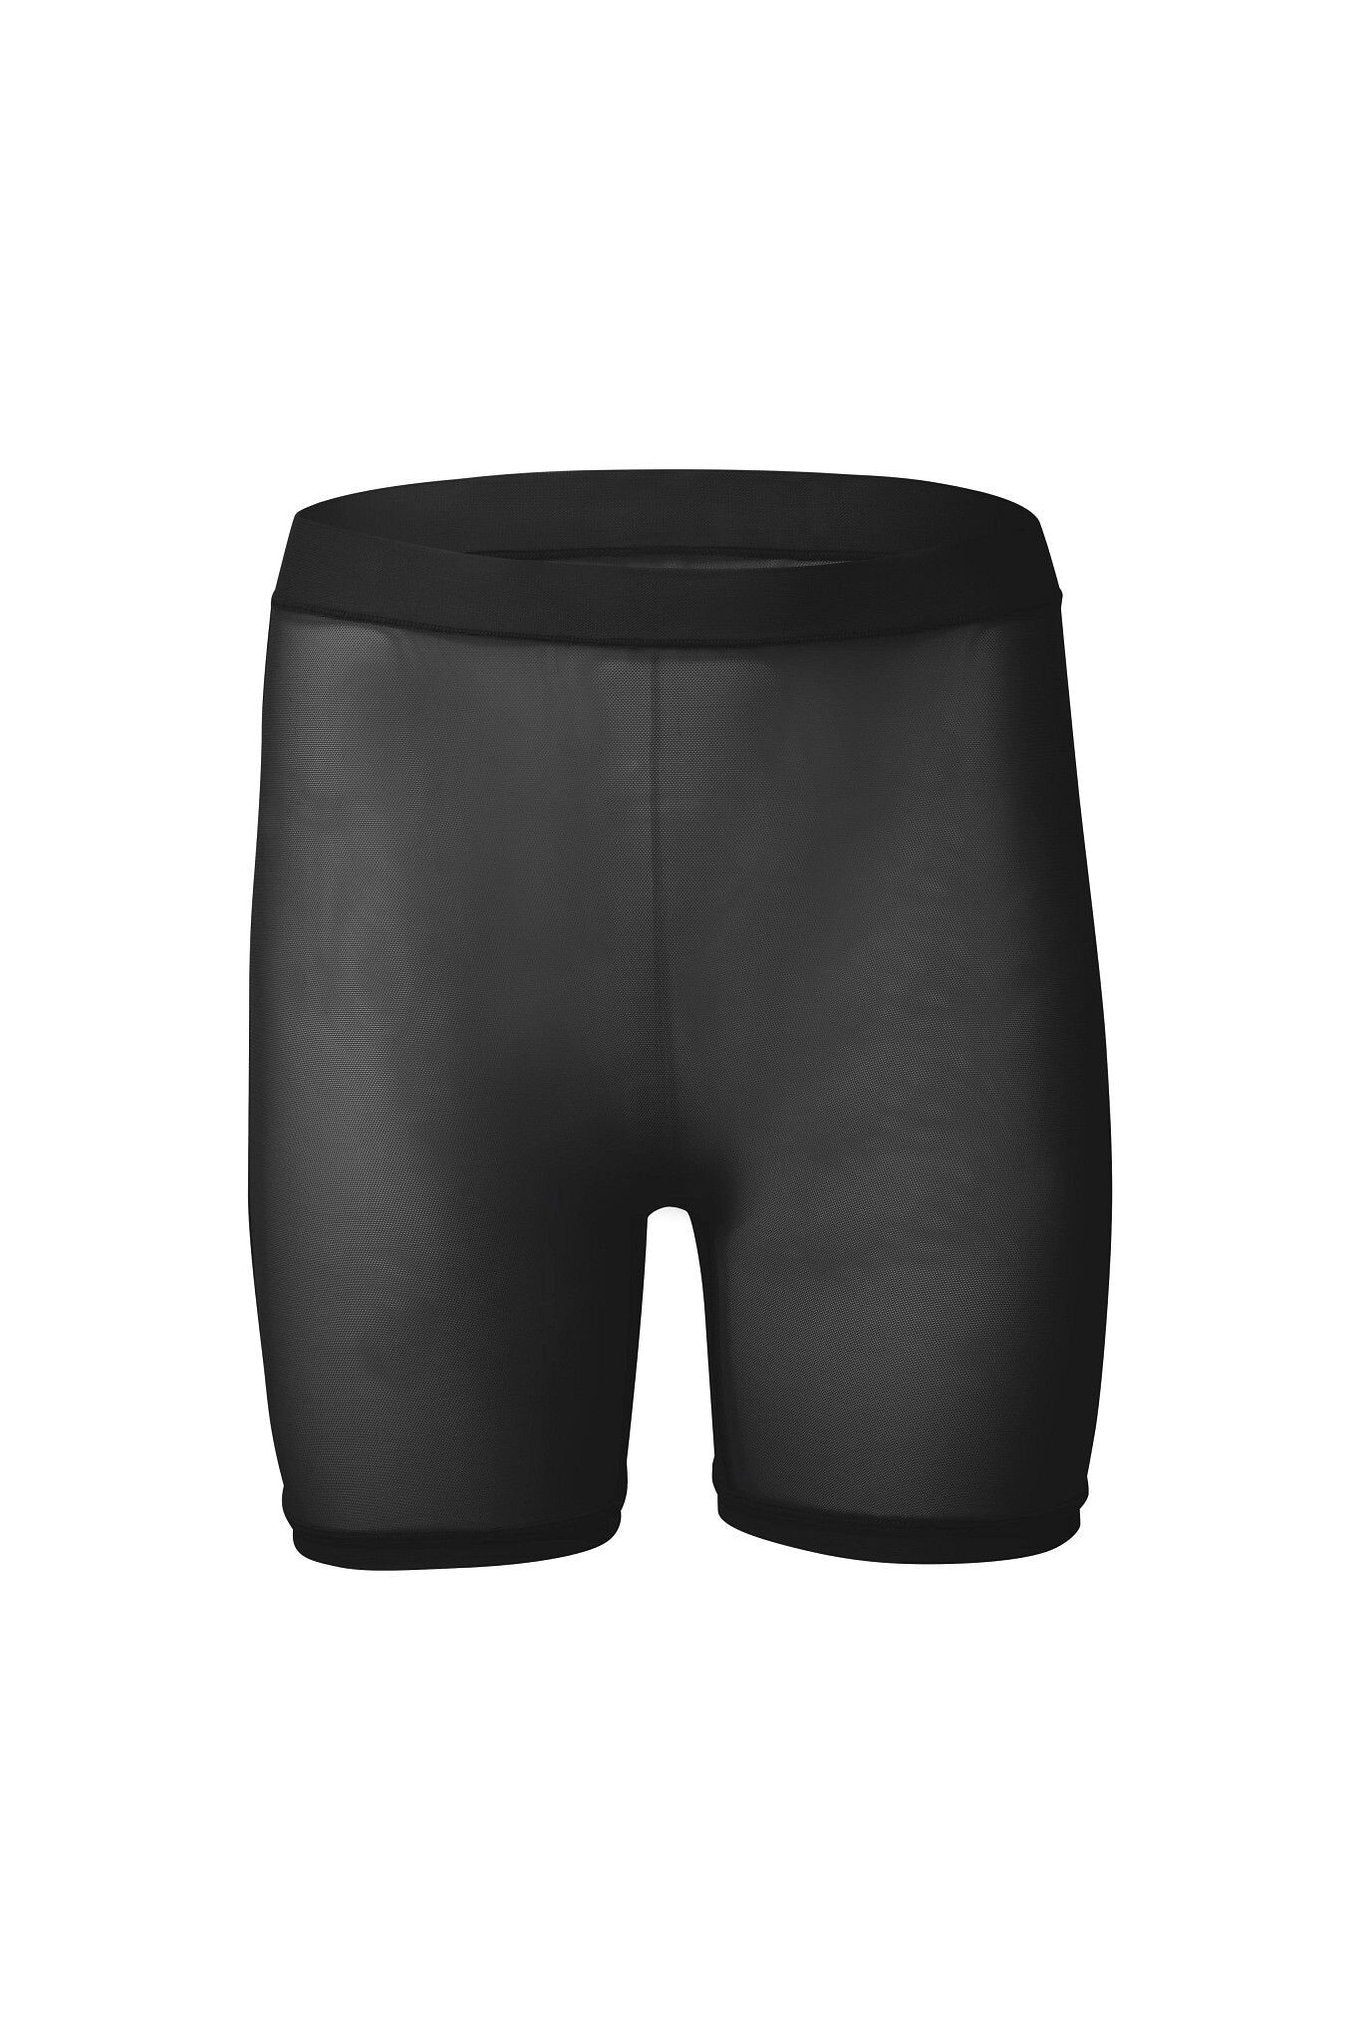 nueskin Dina Mesh High-Rise Shortie in color Jet Black and shape shortie